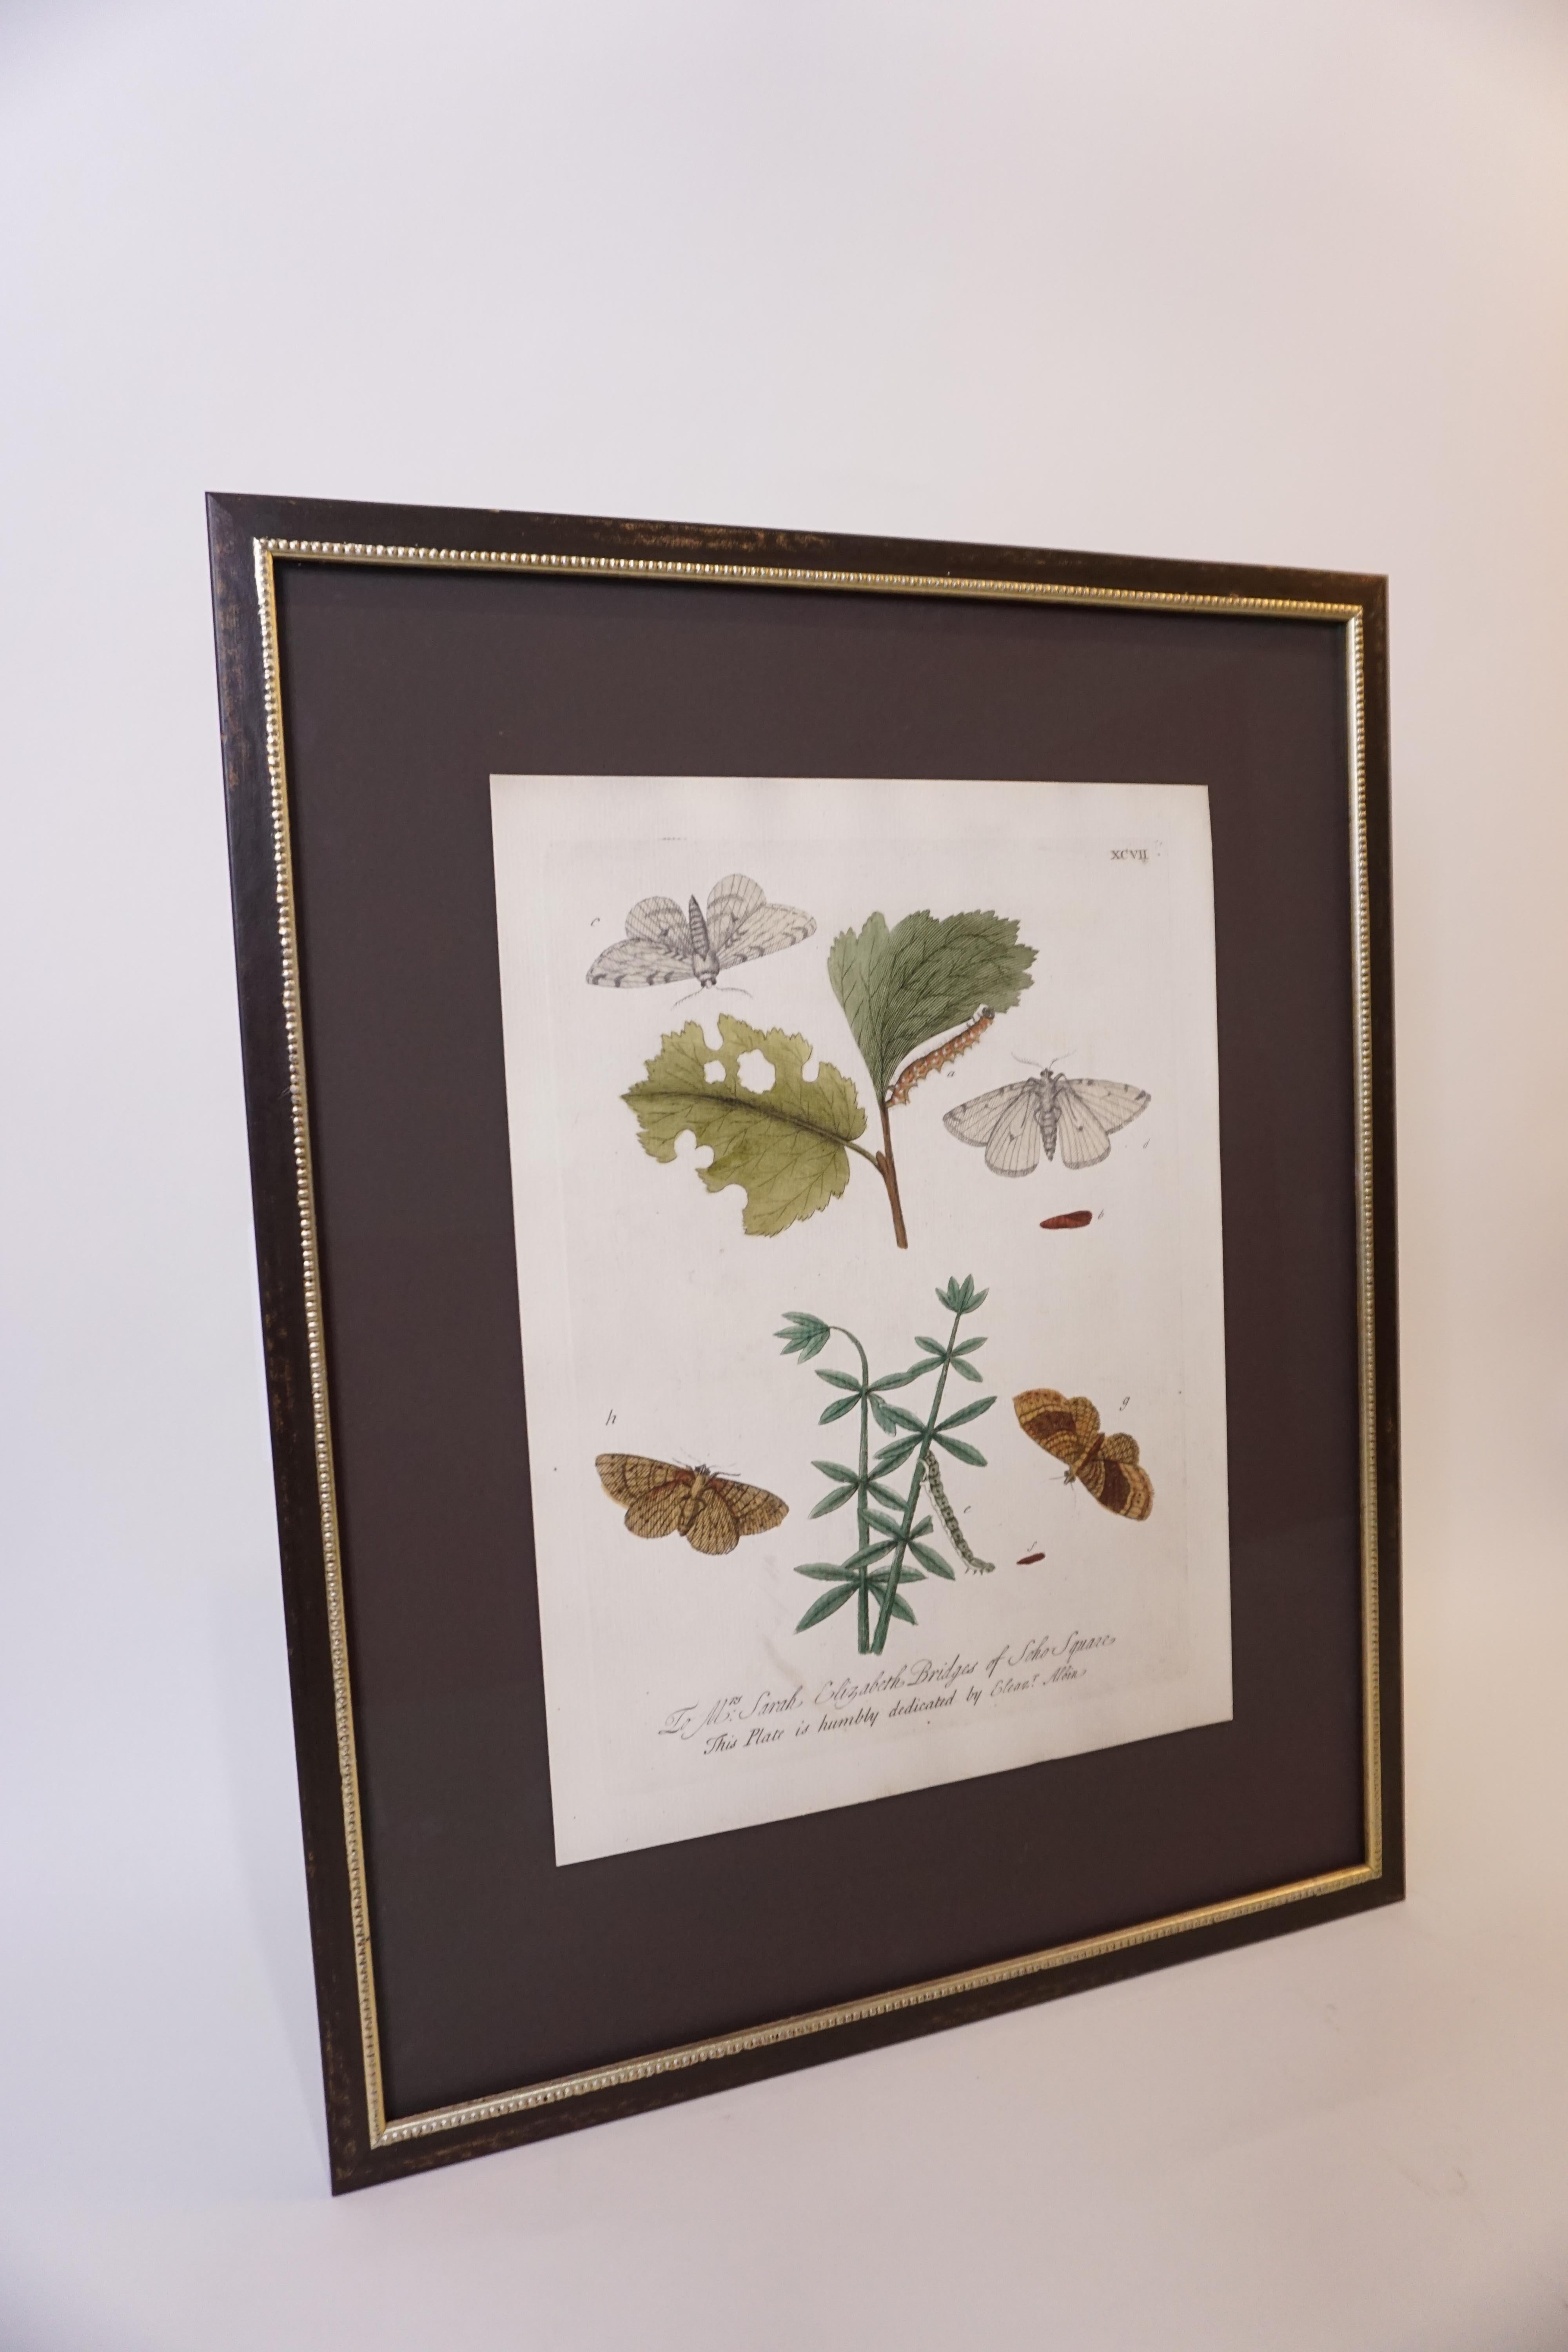 This antique butterfly botanical print is well-preserved in a museum glass and wood frame. A beautiful wall accent and work of art.